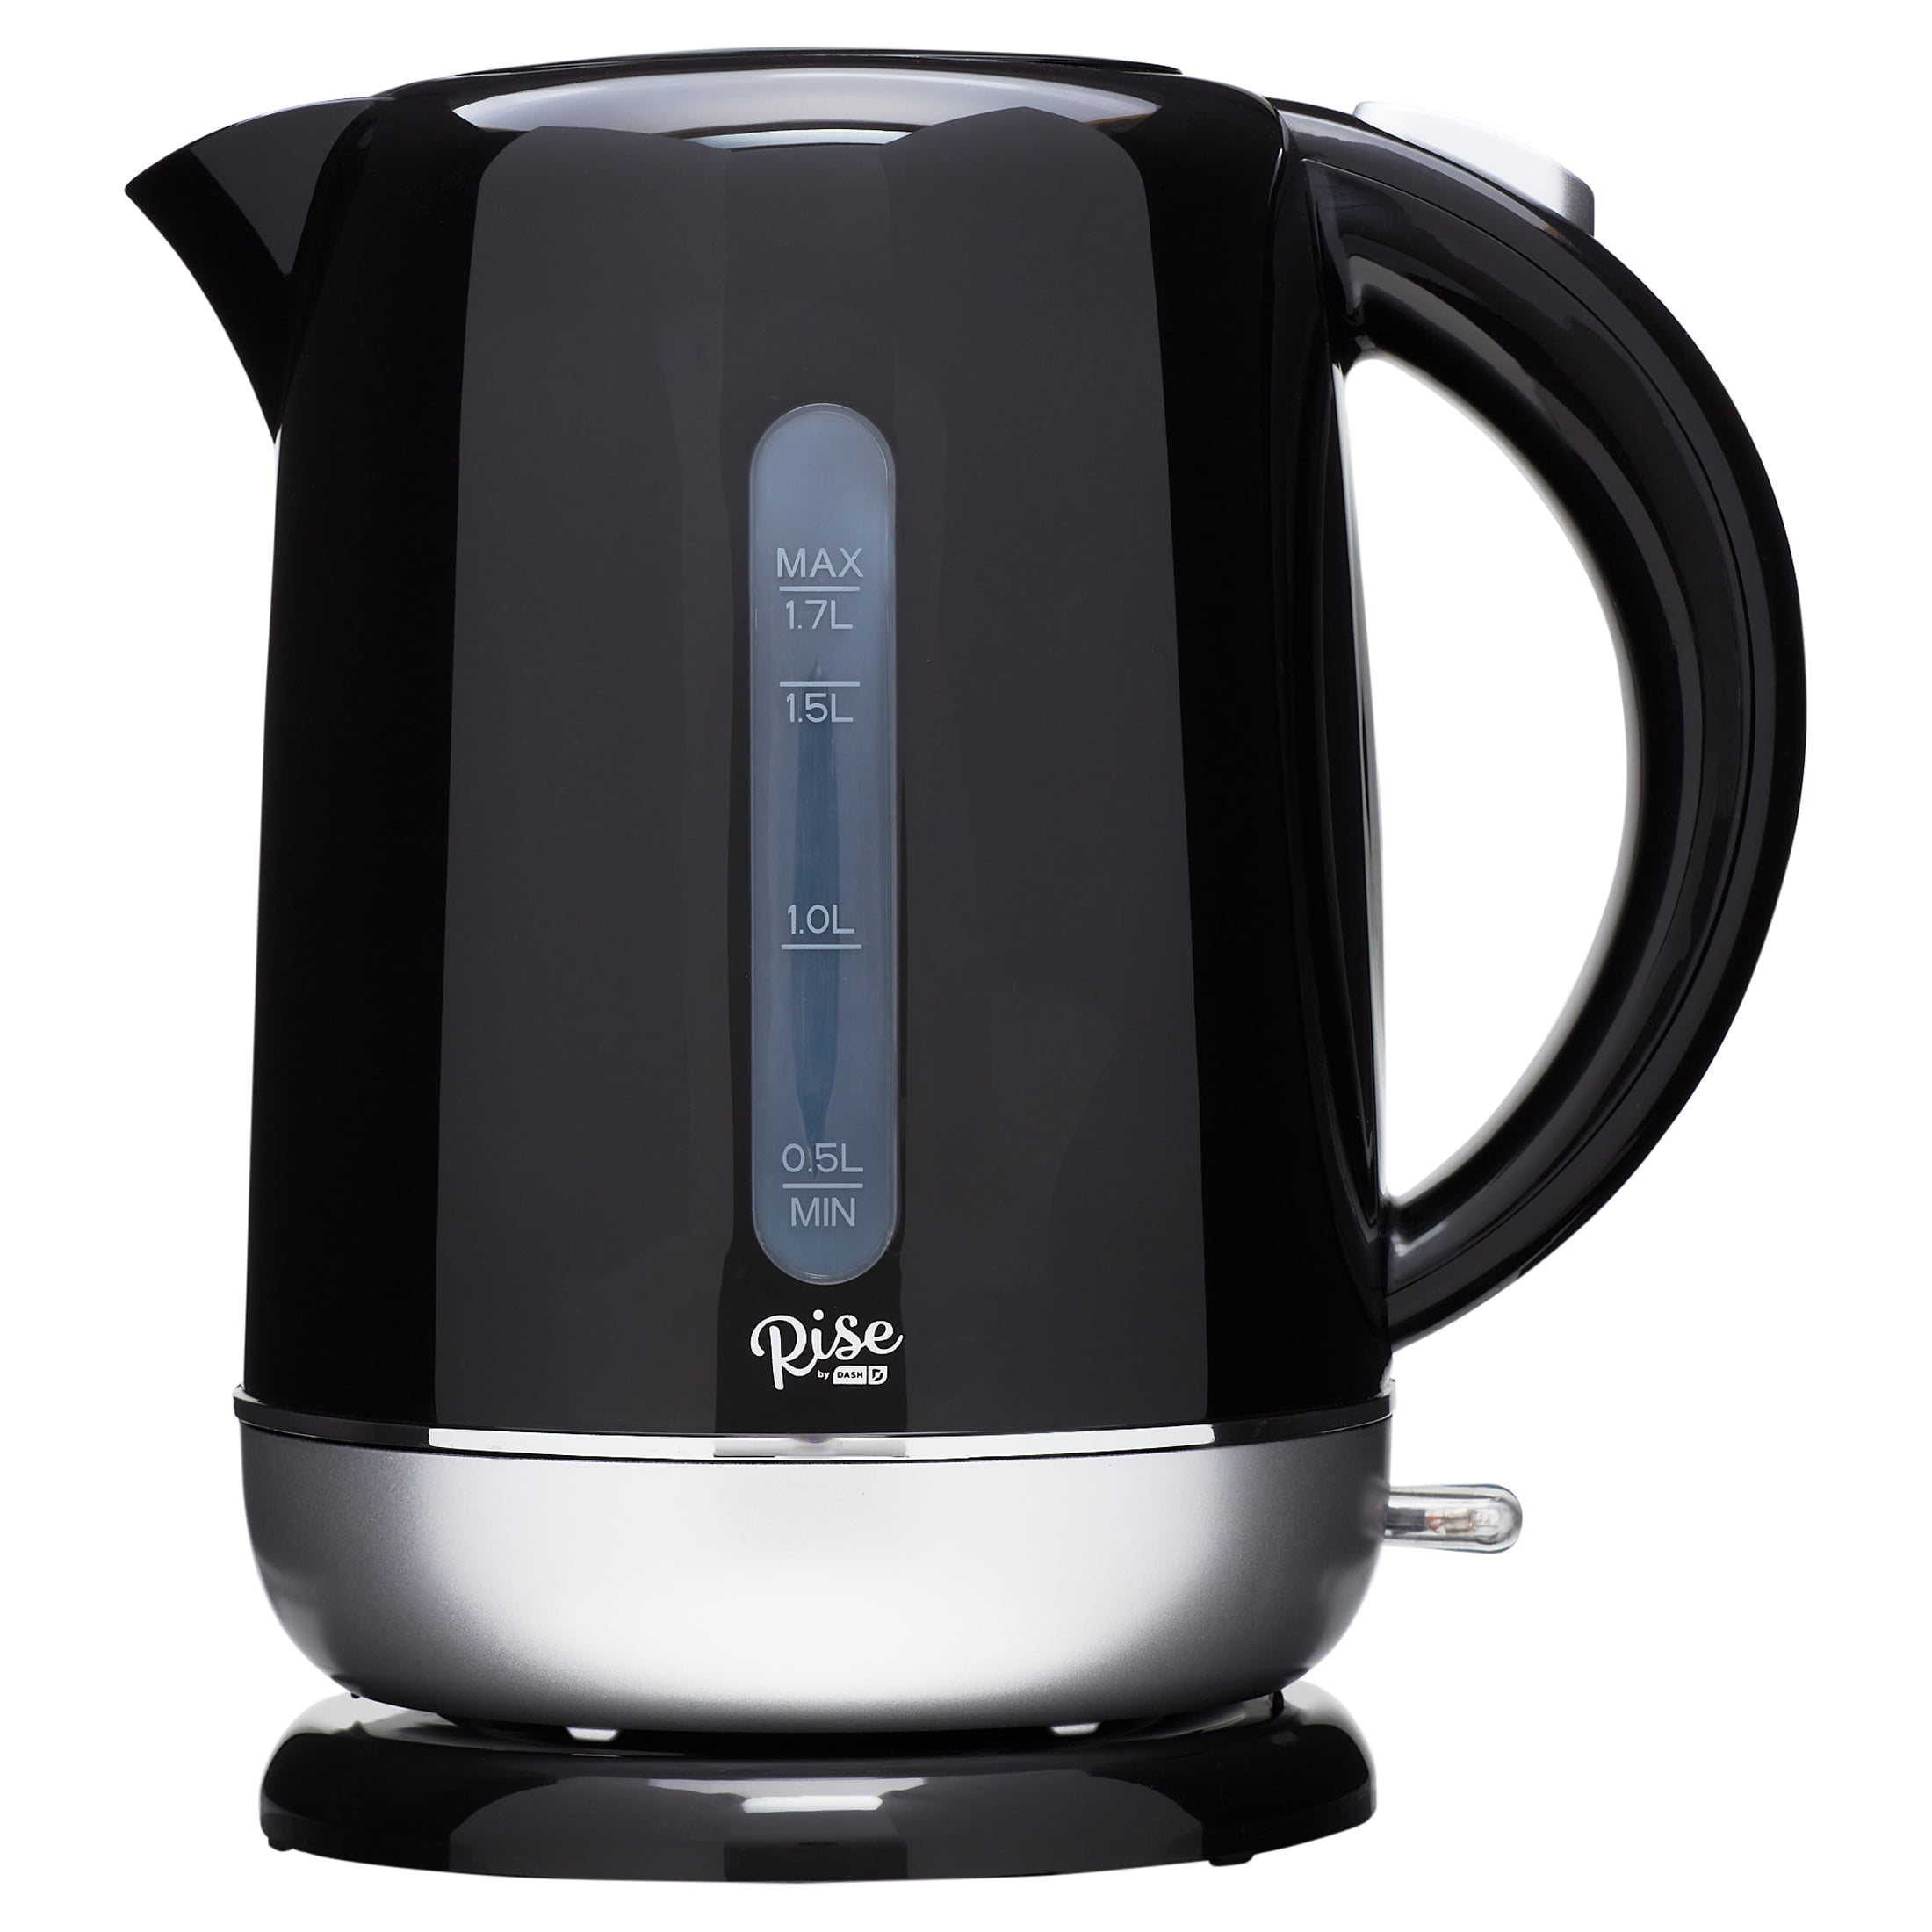 Rise By Dash 1.7 Liter Electric Kettle + Water Heater with Rapid Boil,  Cordless Carafe + Auto Shut off for Coffee, Tea, Espresso & More - Black 